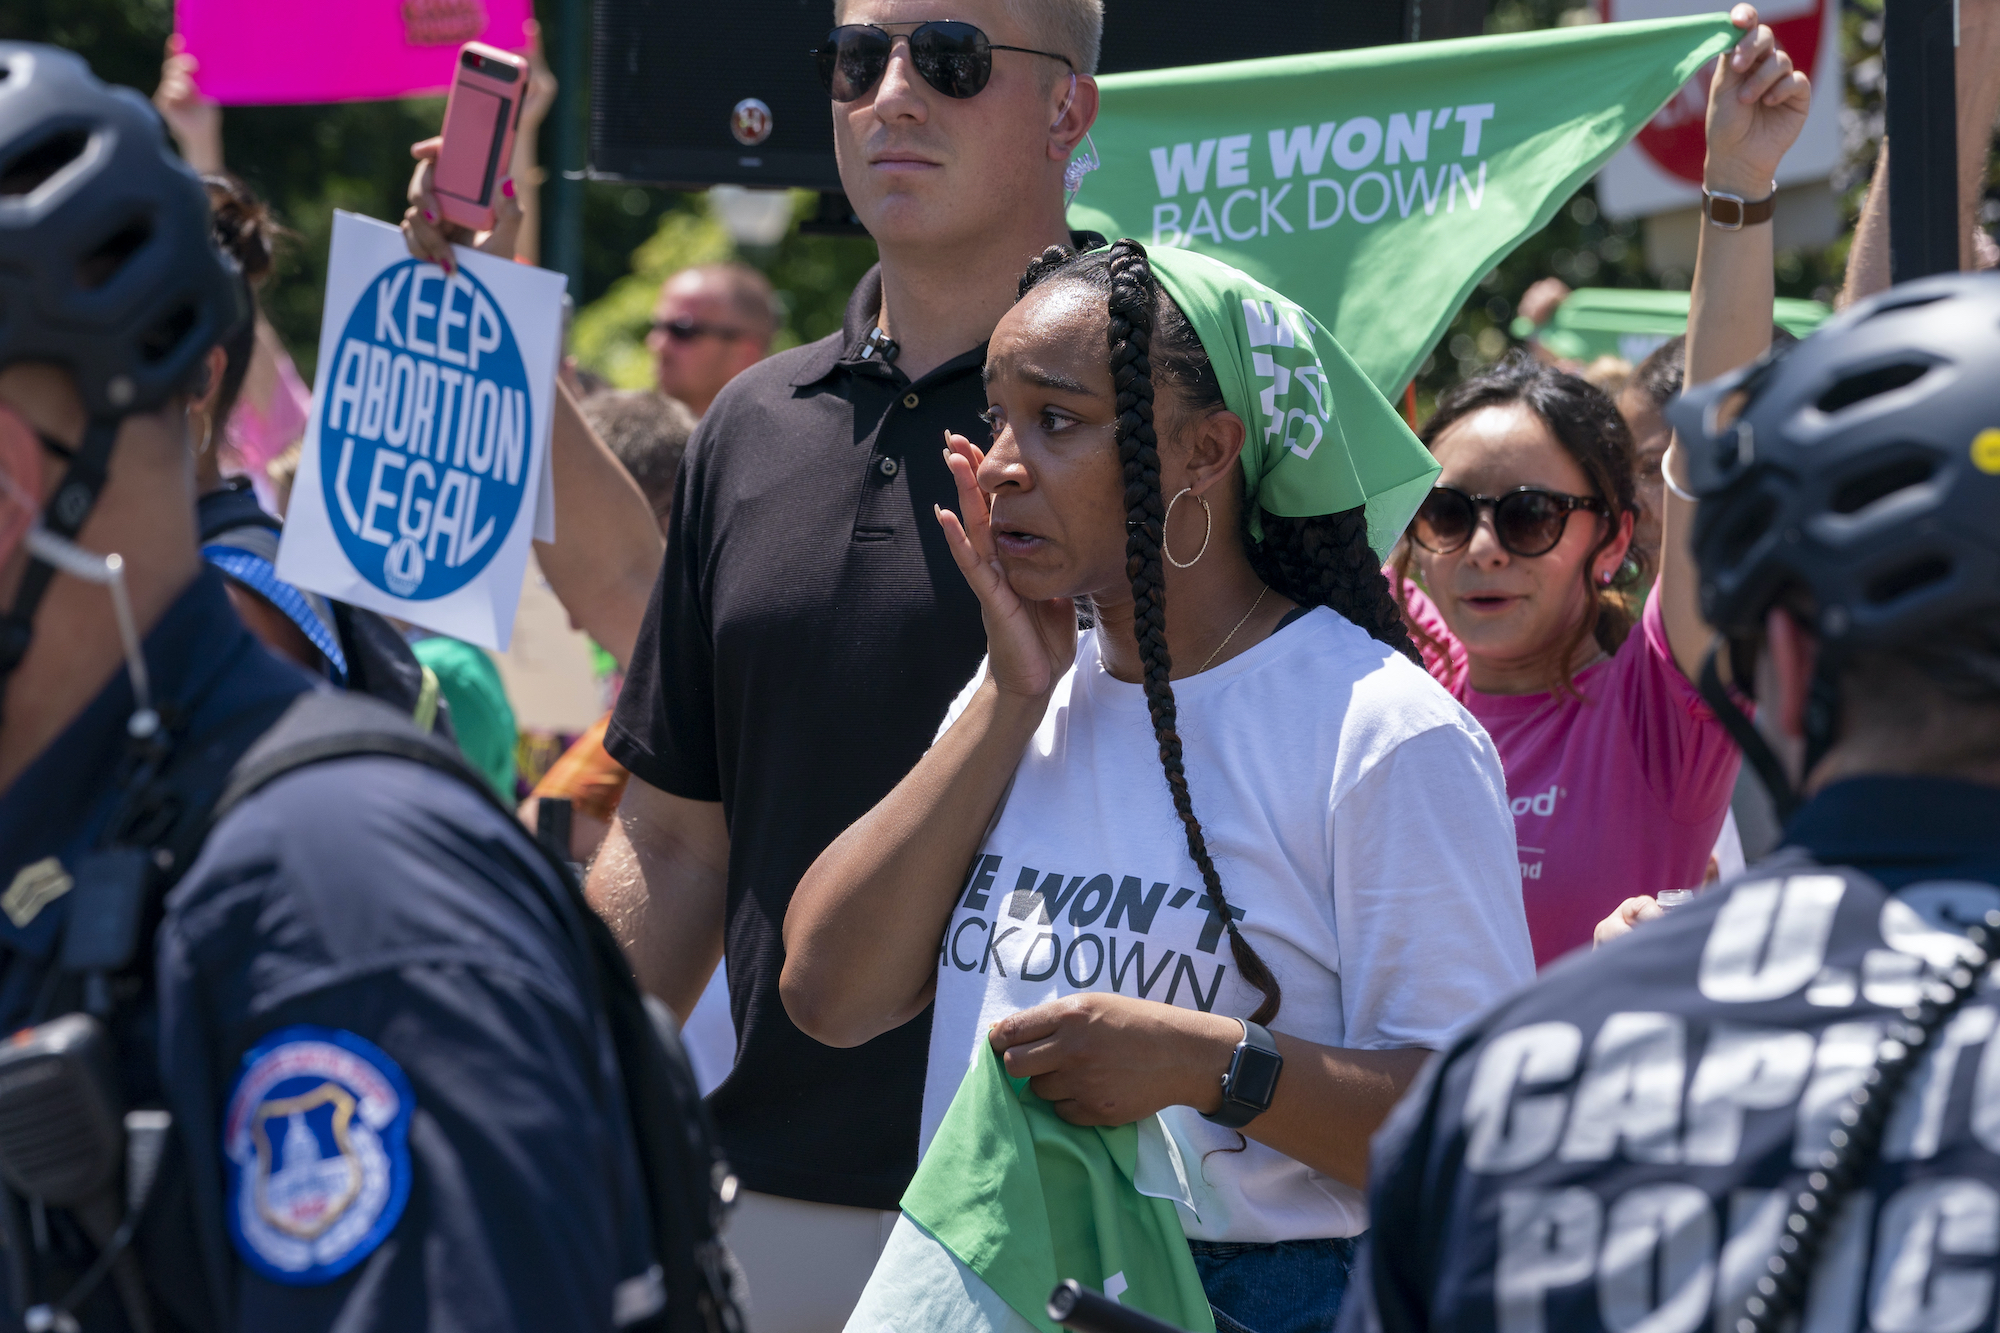 A person tearing up in a crowd of people. The person, who is holding a green bandana, wears a shirt that says "We Won't Back Down." Other people hold up signs in the crowd, including "Keep Abortion Legal."